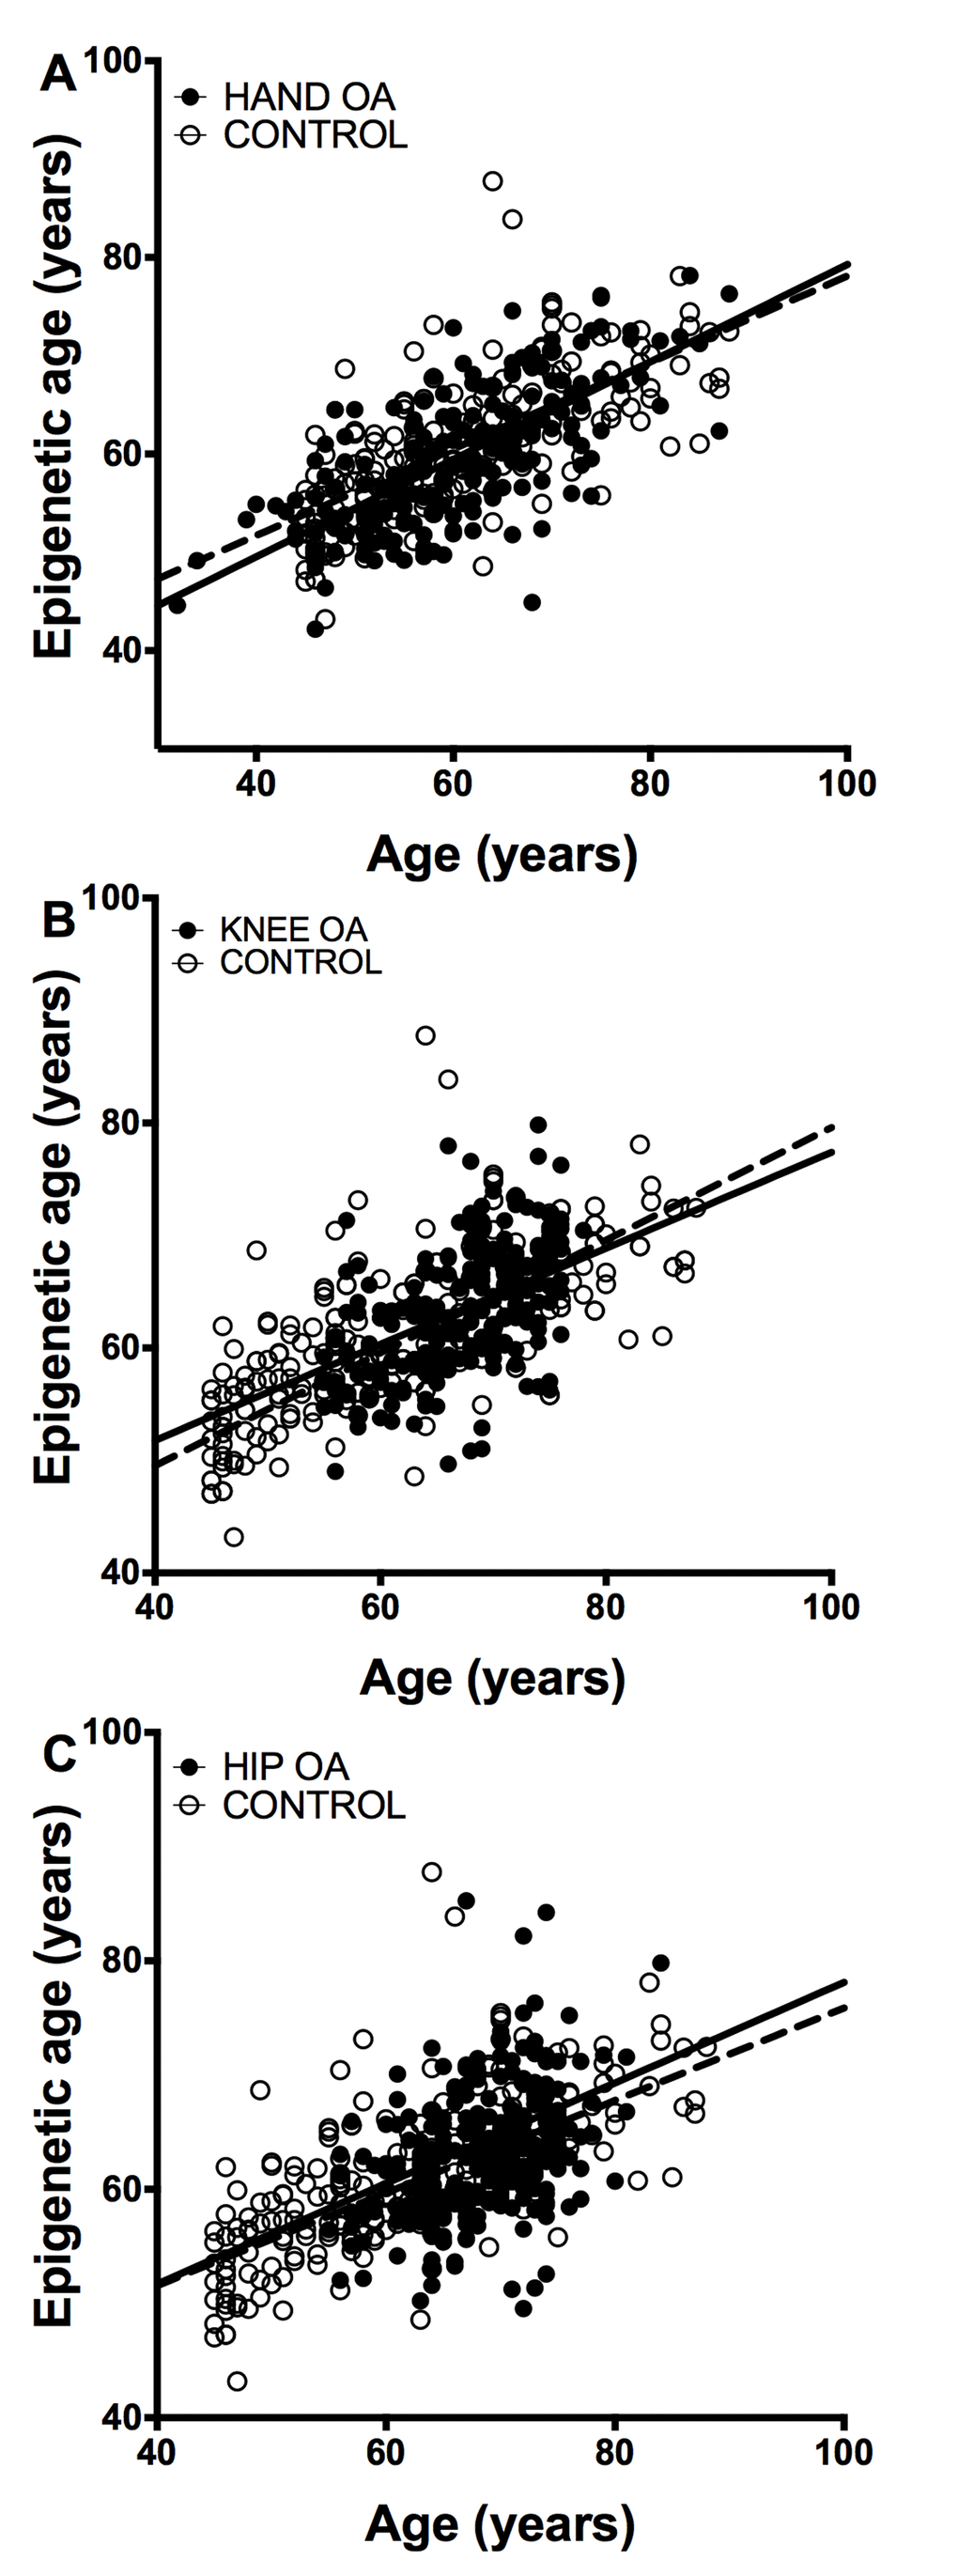 Lack of accelerated epigenetic aging in blood cells of OA patients. The scatterplots represent age in the horizontal axis against epigenetic age in the vertical axis from the controls without OA (empty circles, n =182) together with (A) the hand OA (n = 206), (B) the knee OA (n = 229), and (C) the hip OA (n = 273) patients (filled circles). Straight lines represent least squares regression fit to the data.